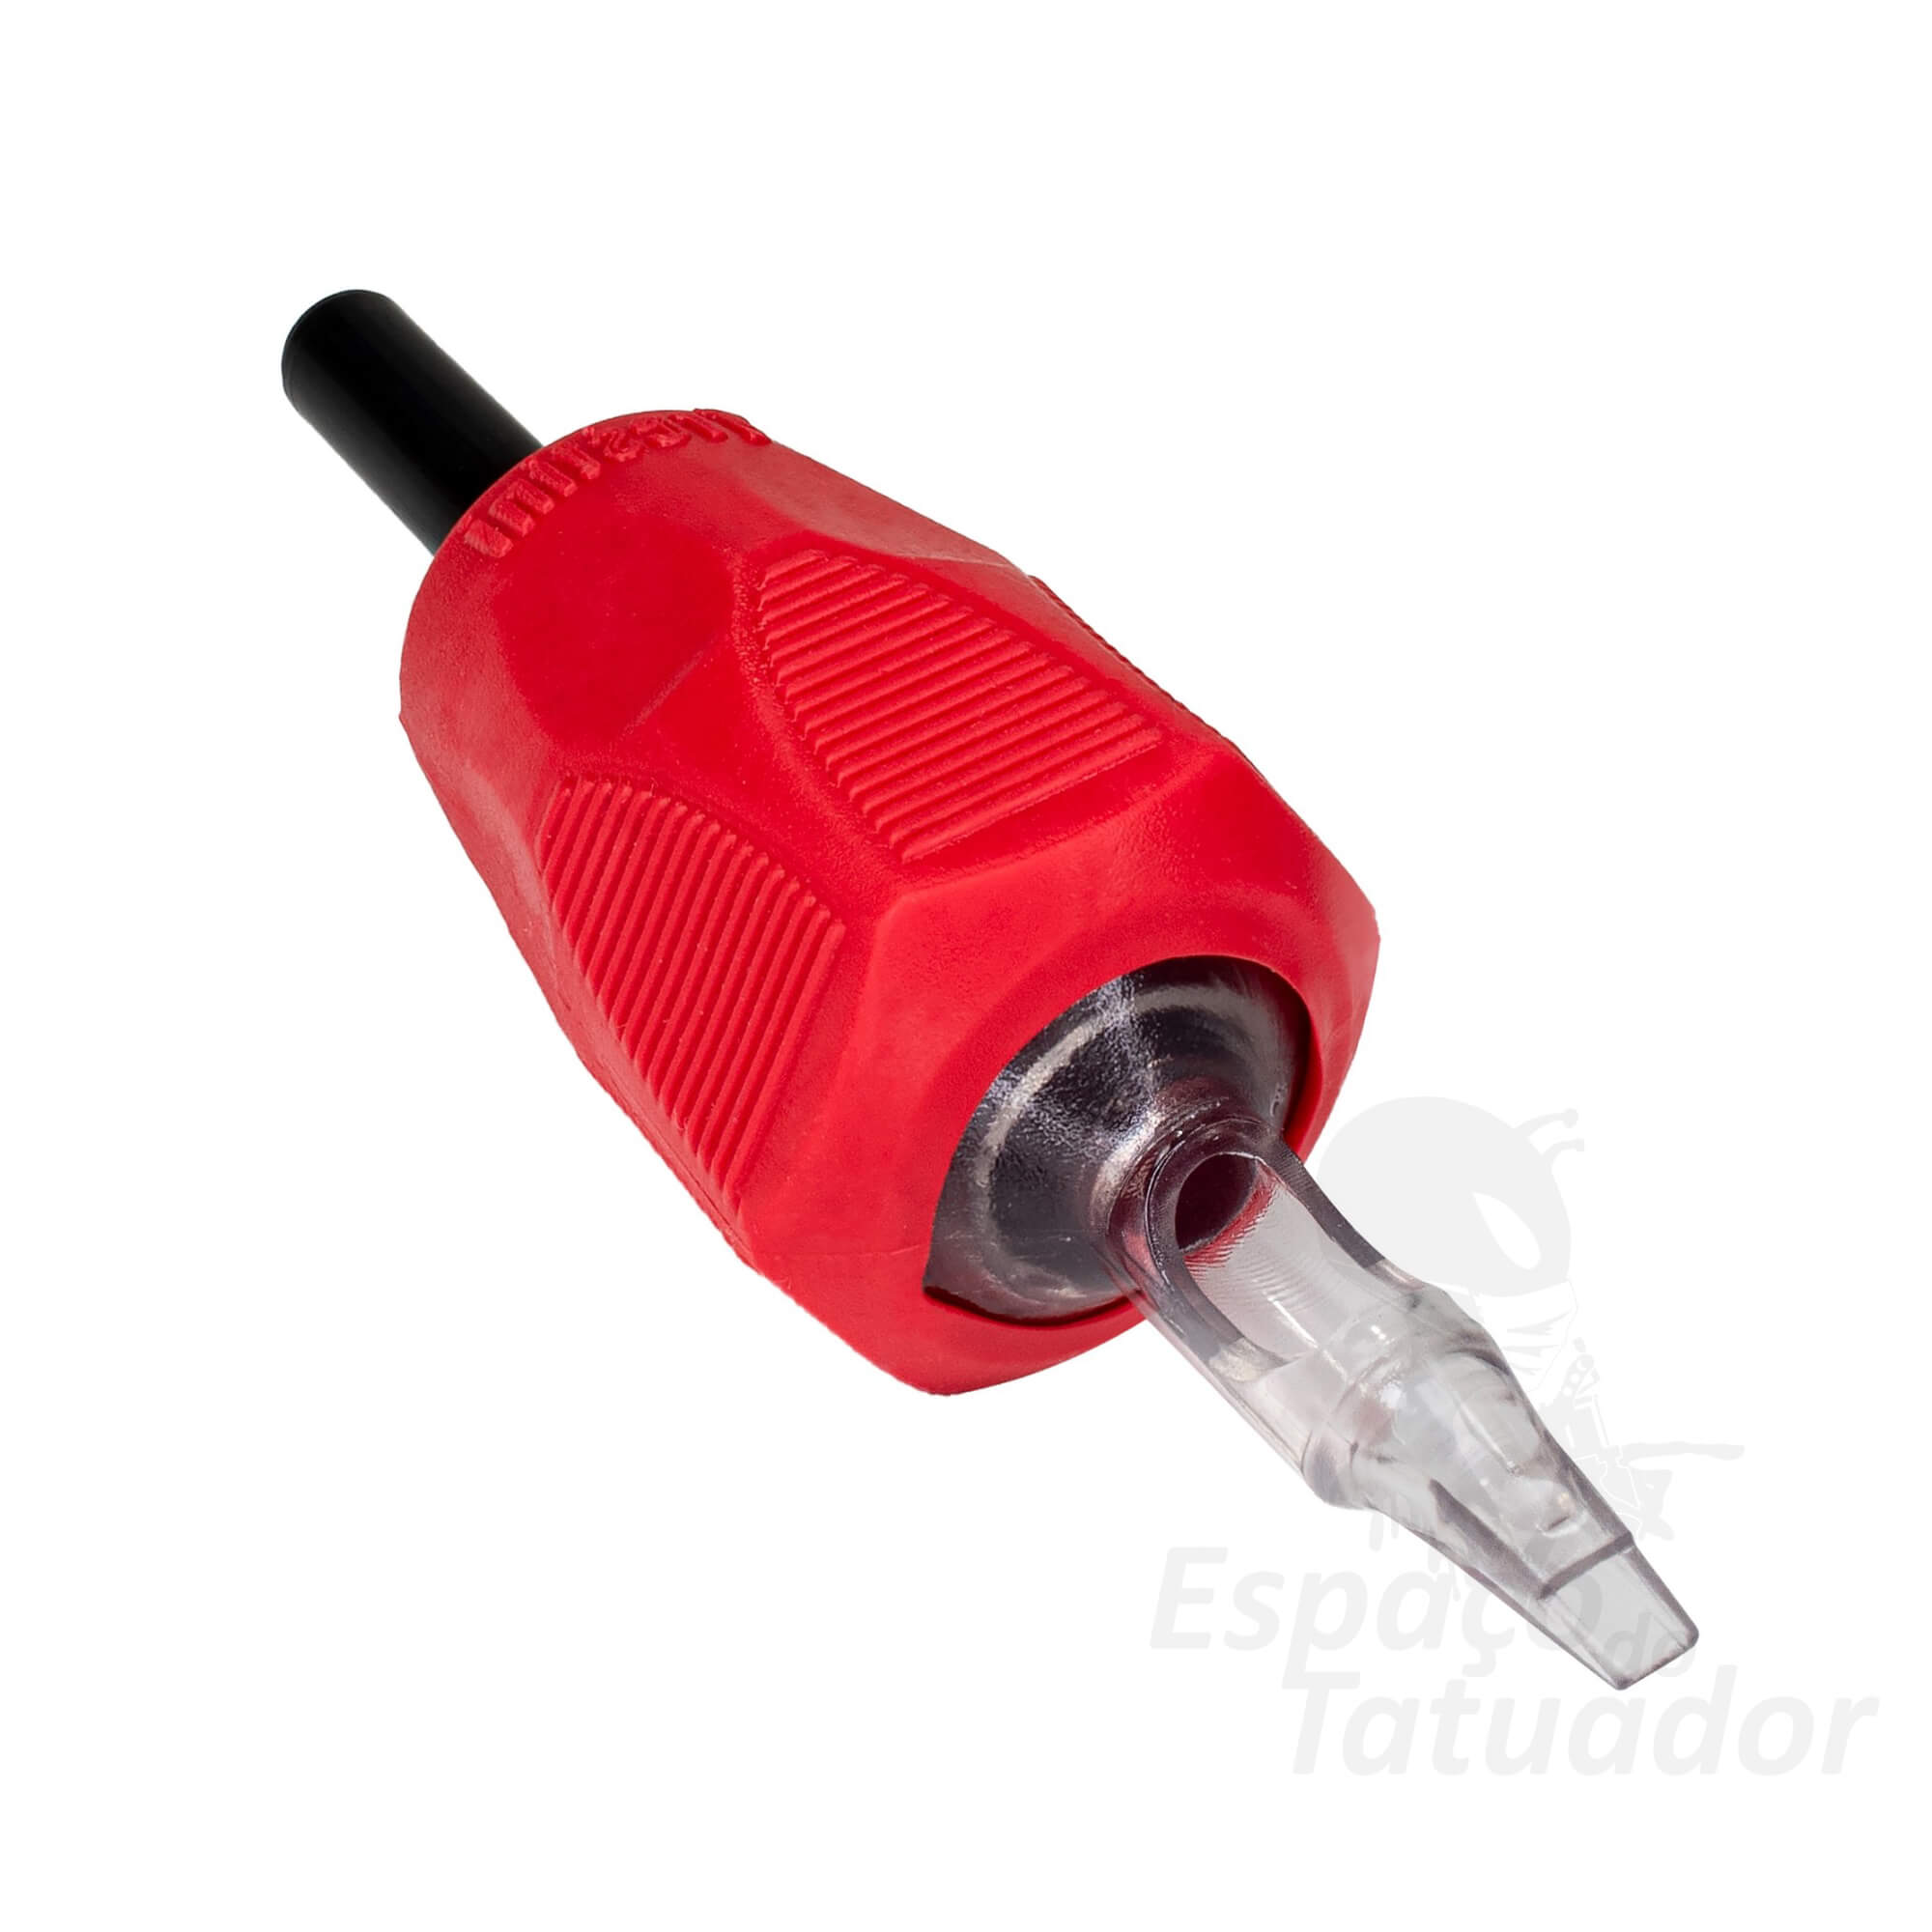 Biqueira MG 11 - 25mm Capsule Ink Red - 20 Unidade - Foto 1